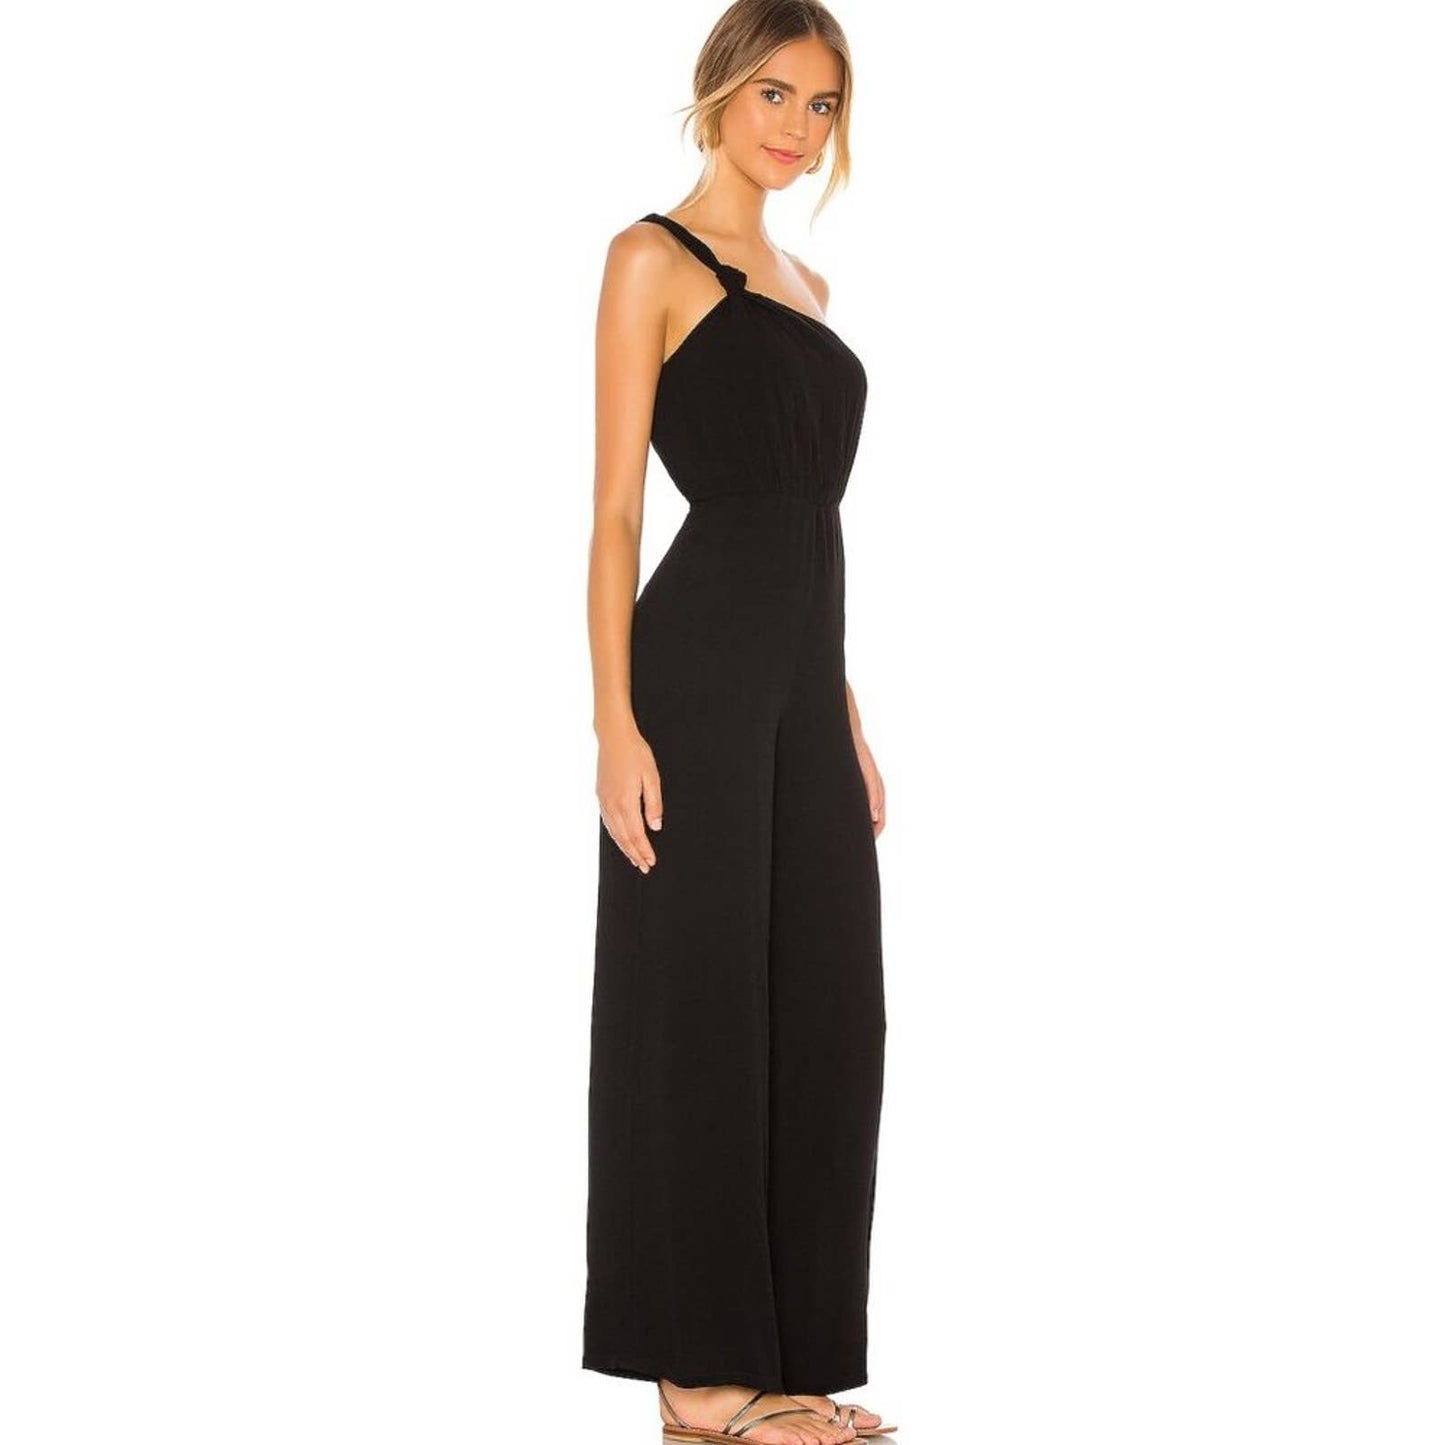 Privacy Please Blanche Jumpsuit in Black NWT Size Small